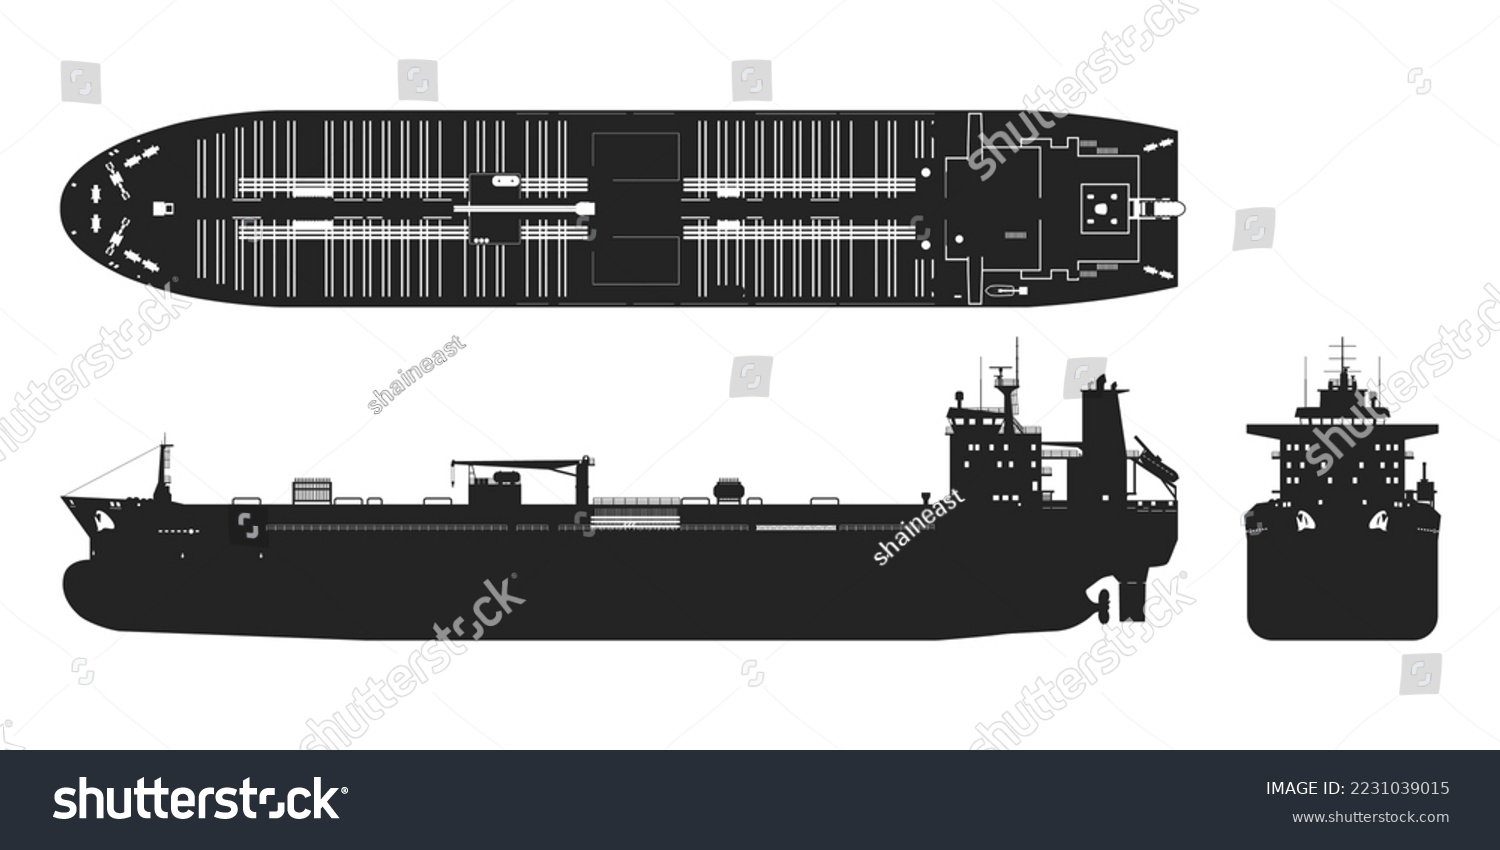 SVG of Tanker black silhouette. Cargo ship industrial blueprint. Petroleum boat view top, side and front. Isolated vehicle drawing. Commerce water transport. Vector illustration svg